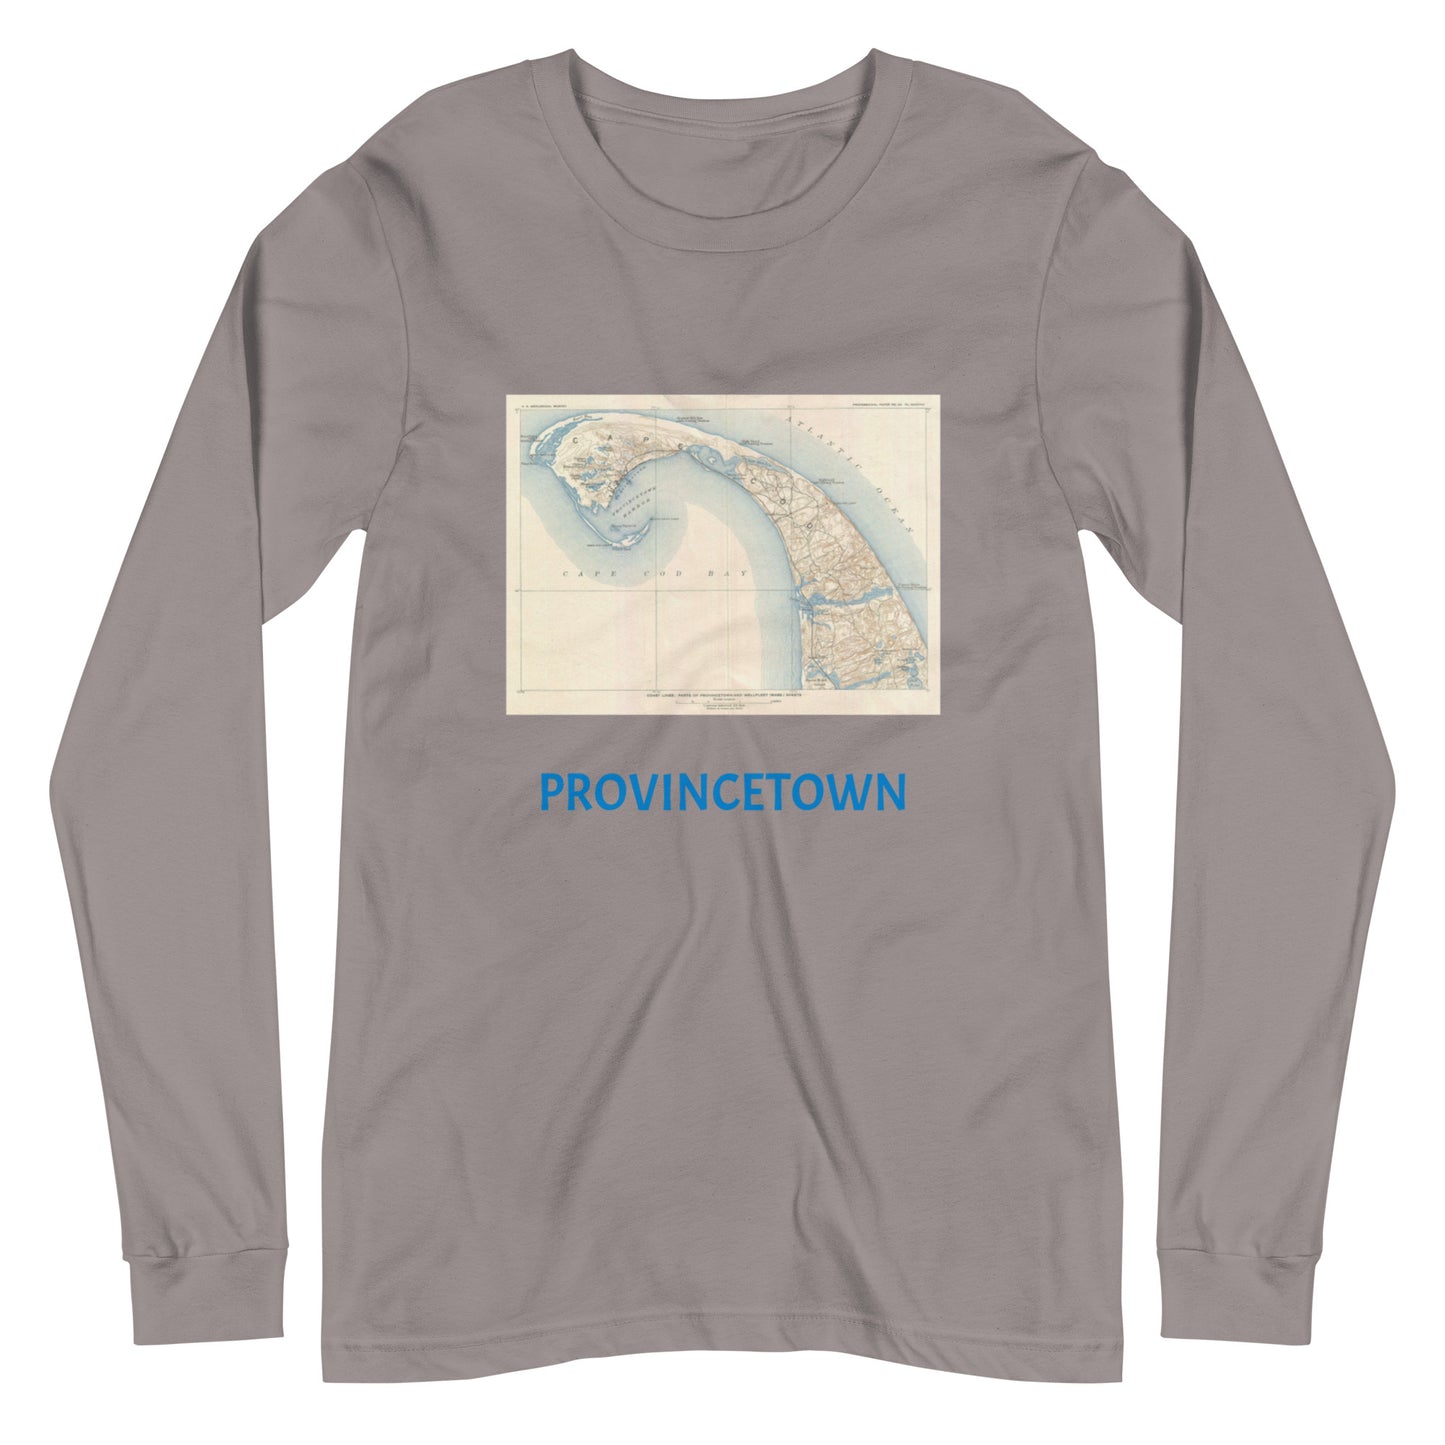 Provincetown Image is from a 1908 U.S. Geological Survey's map of Cape Cod, Massachusetts.Unisex Long Sleeve Tee